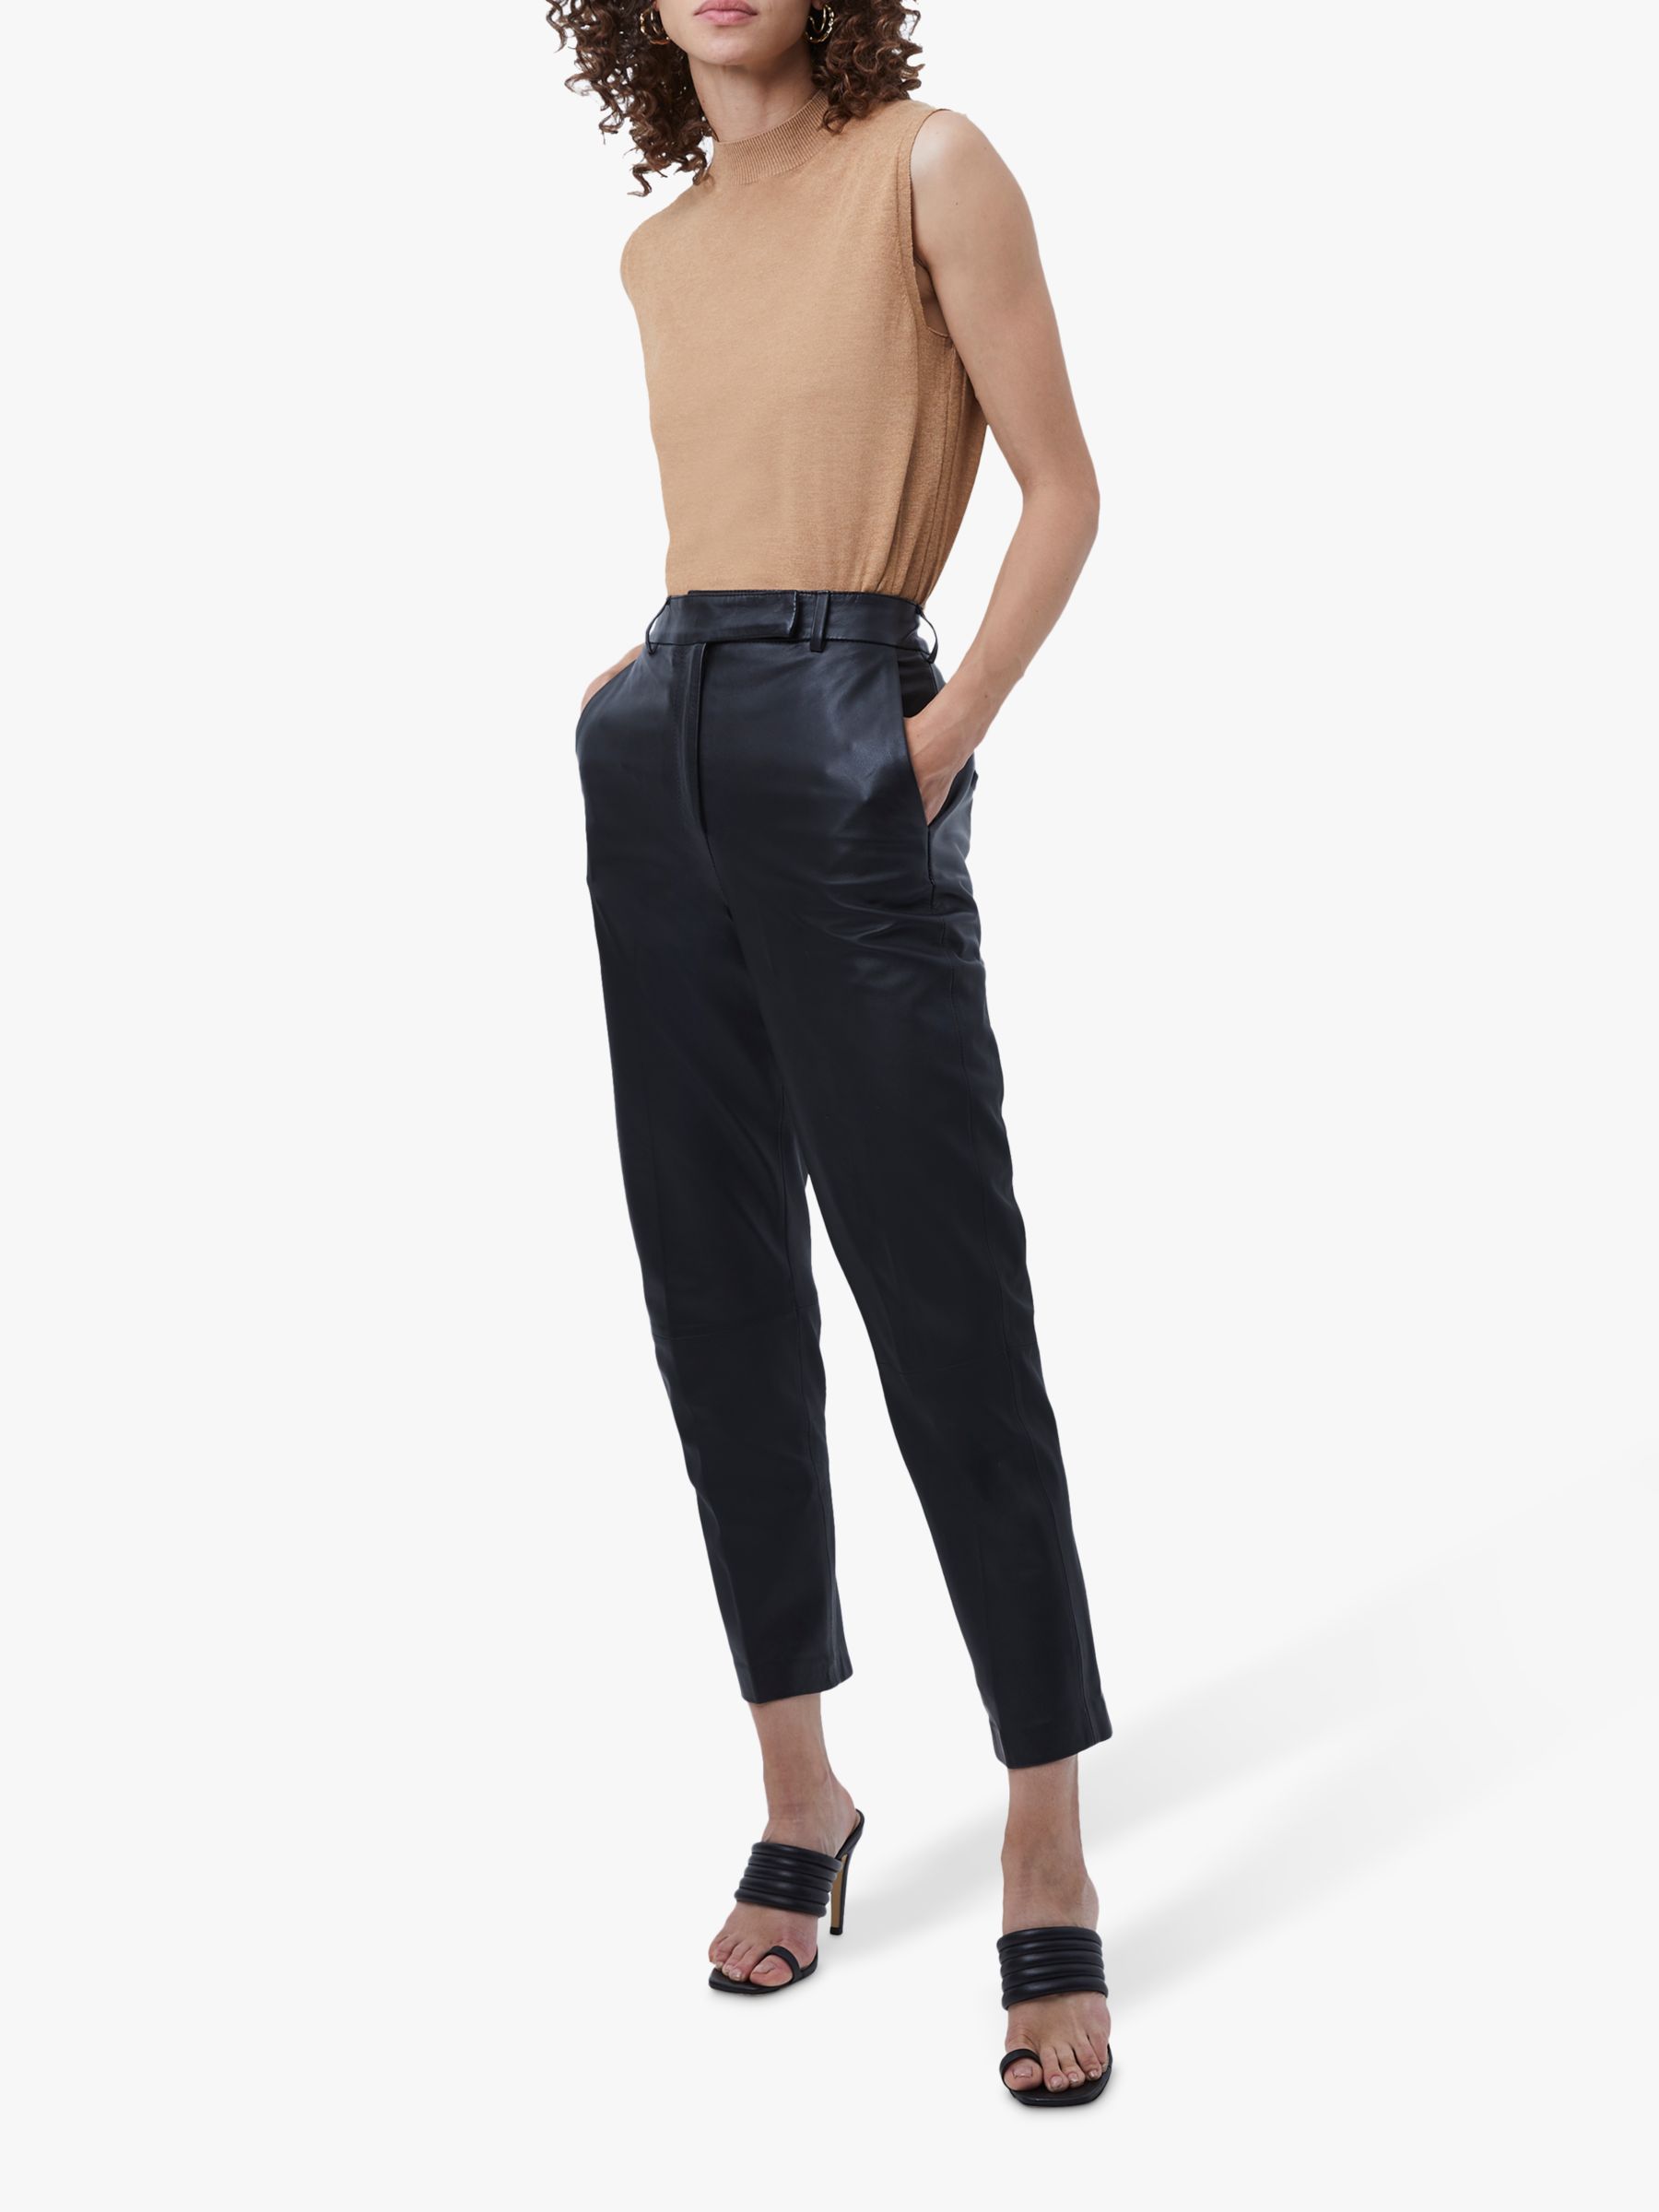 French Connection Alaricia Leather Crop Trousers, Black at John Lewis ...